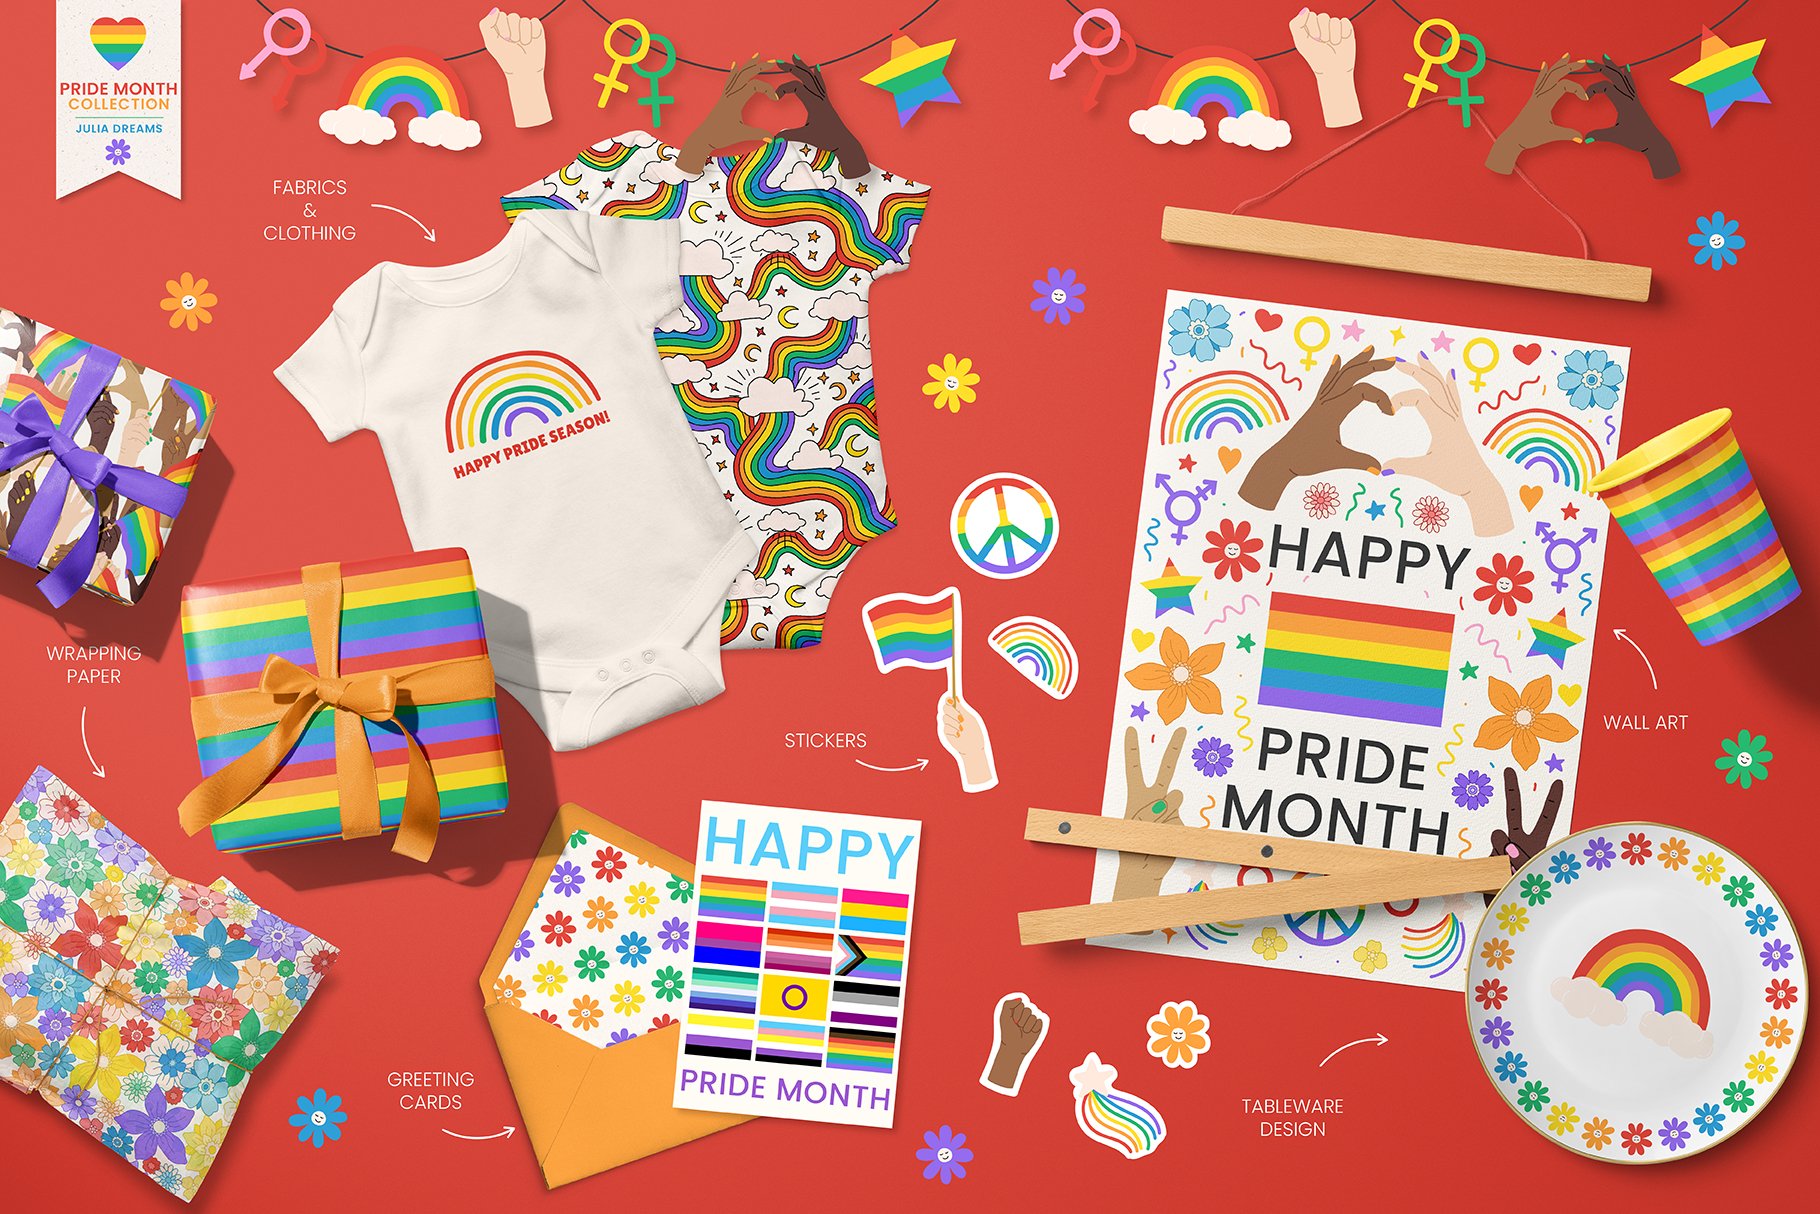 Pride Month Toolbox preview image.